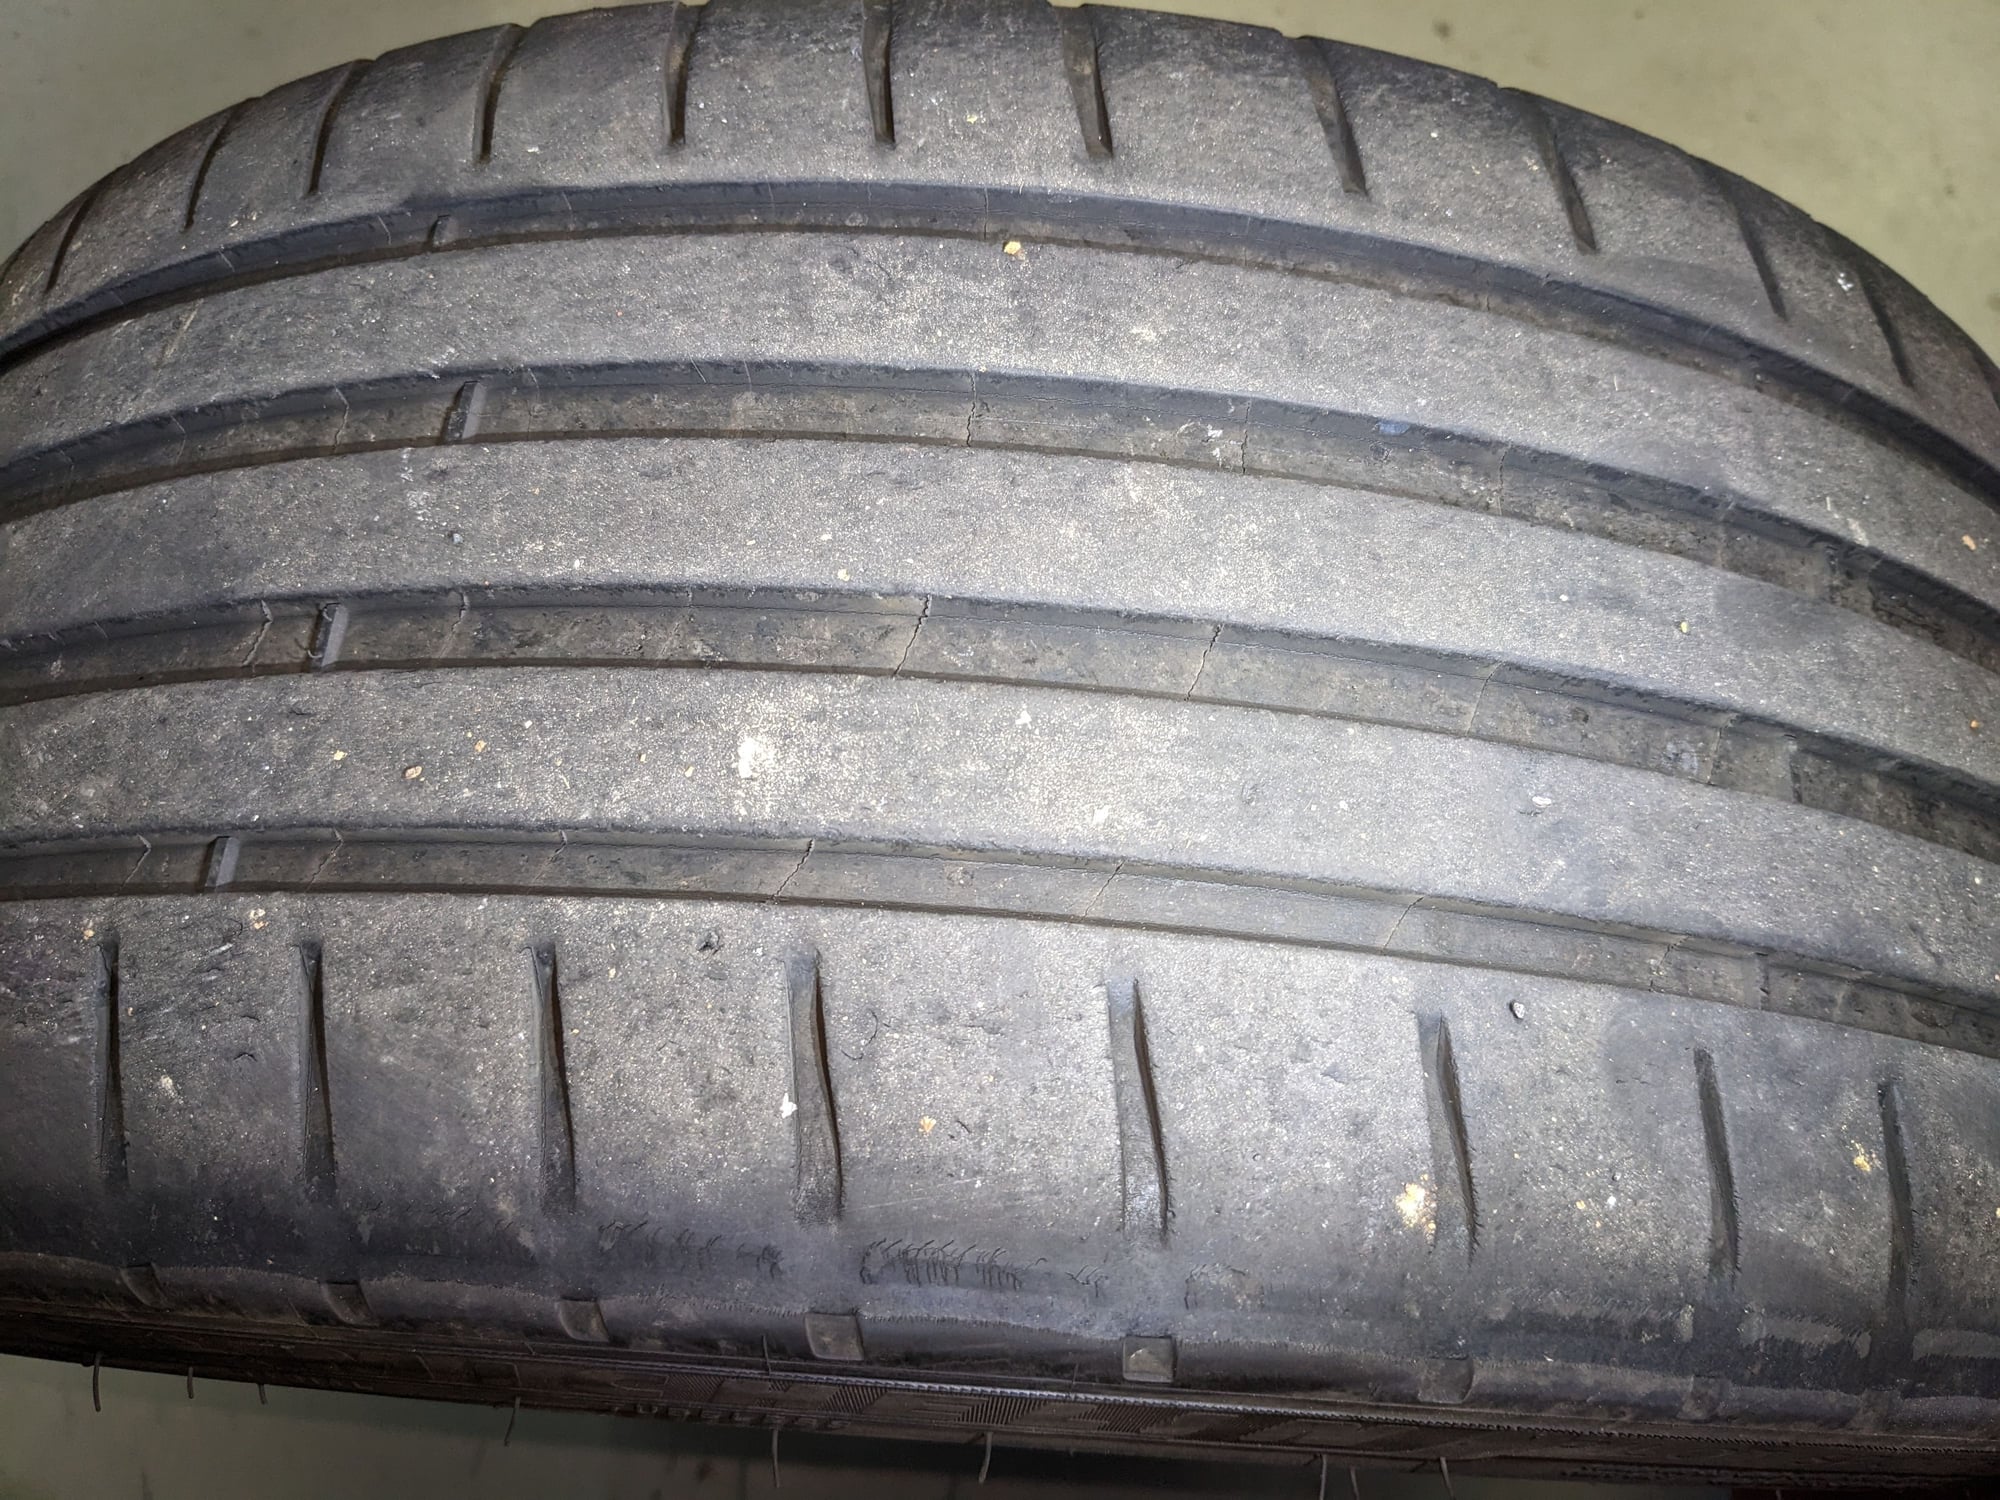 Same inner tire wear on both front tires (4 years old each). Is